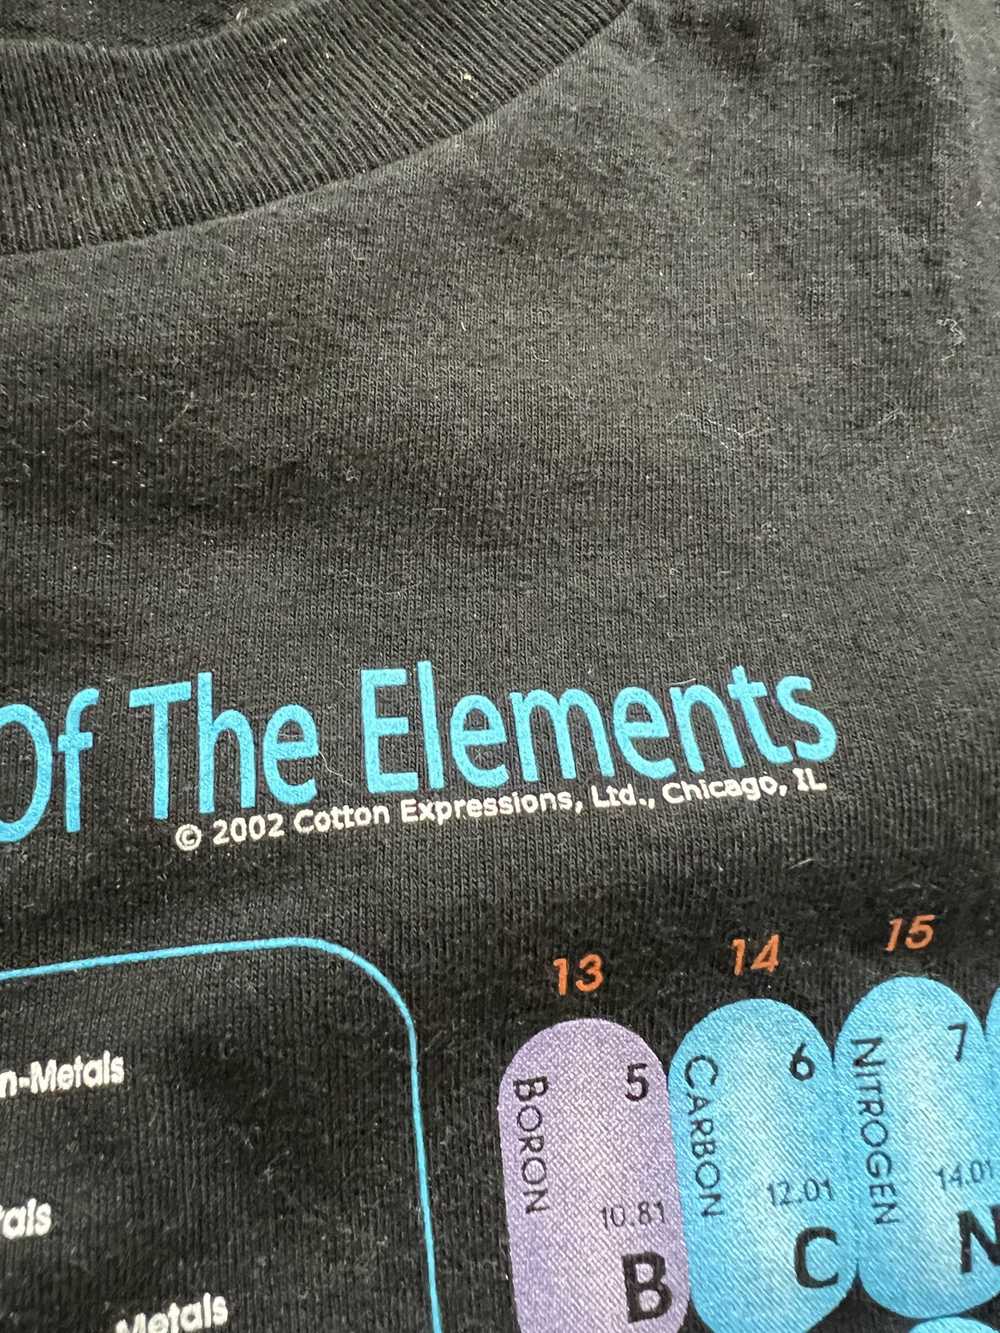 Vintage Vintage Periodic Table of Elements T-Shirt - image 3